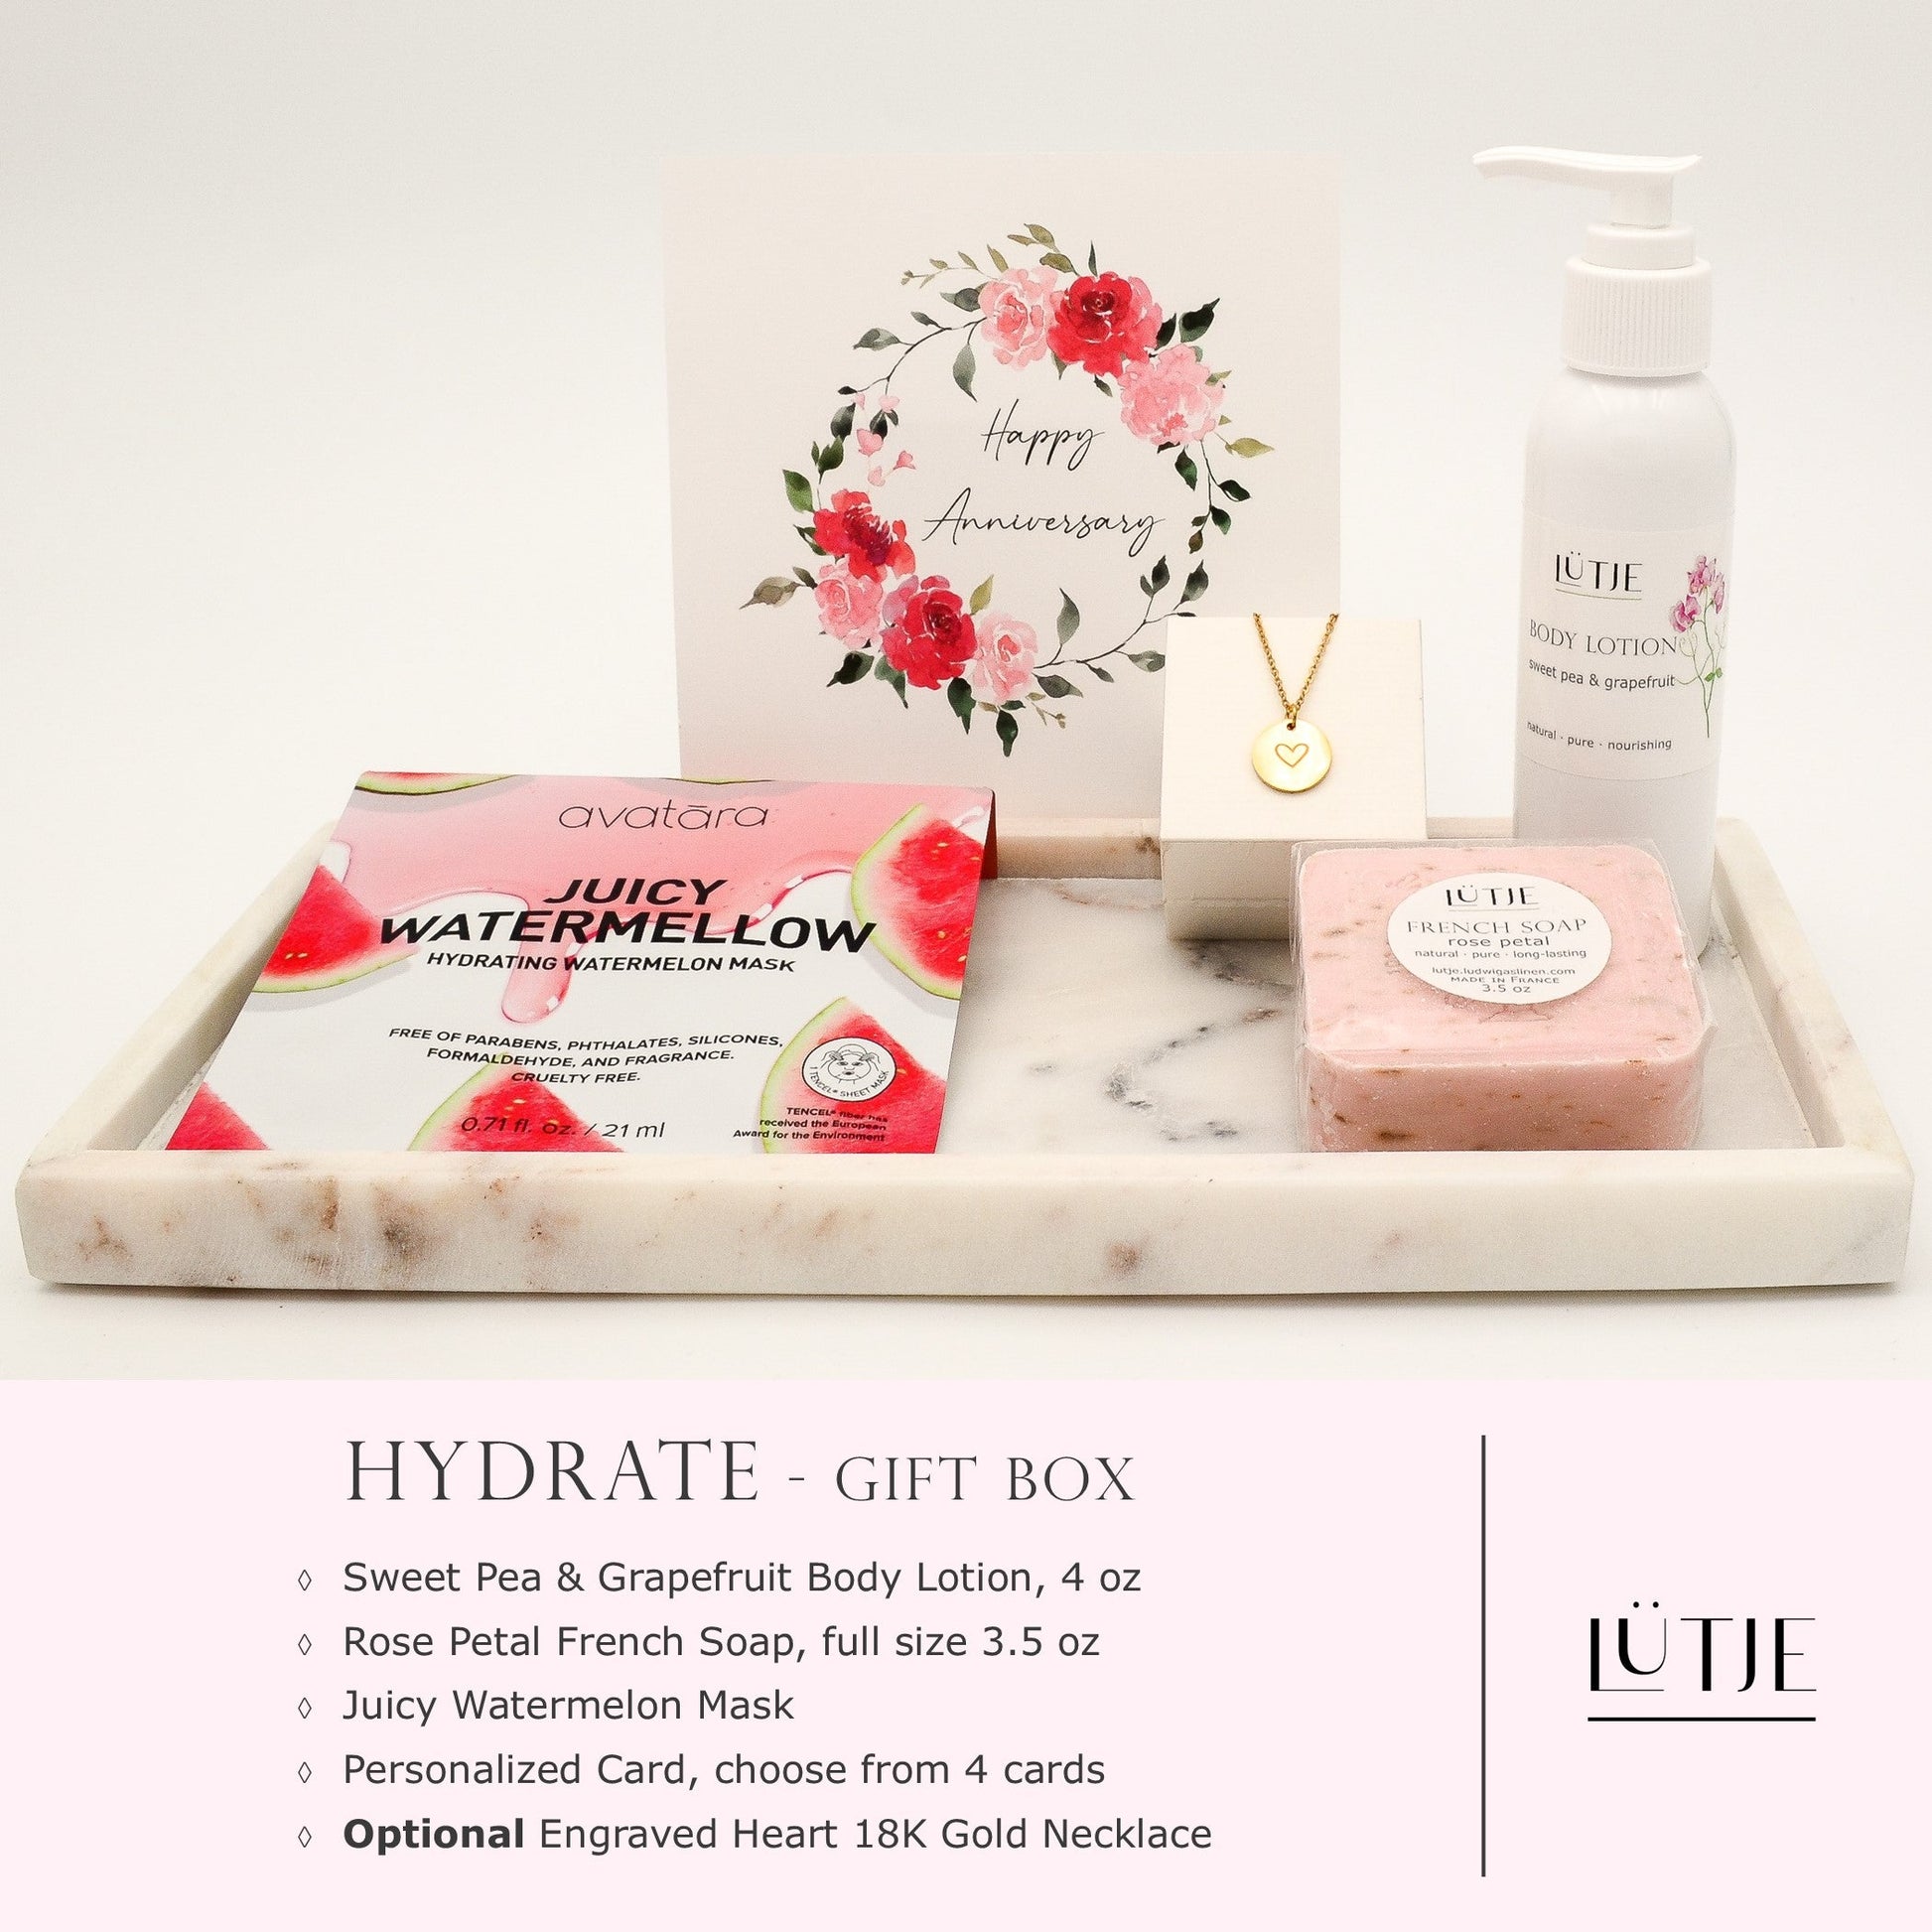 Hydrate Gift Box for women, daughter, mom, BFF, wife, sister or grandma, includes Sweet Pea & Grapefruit body lotion, French soap, hydrating face mask, and 18K gold-plated necklace with engraved heart.